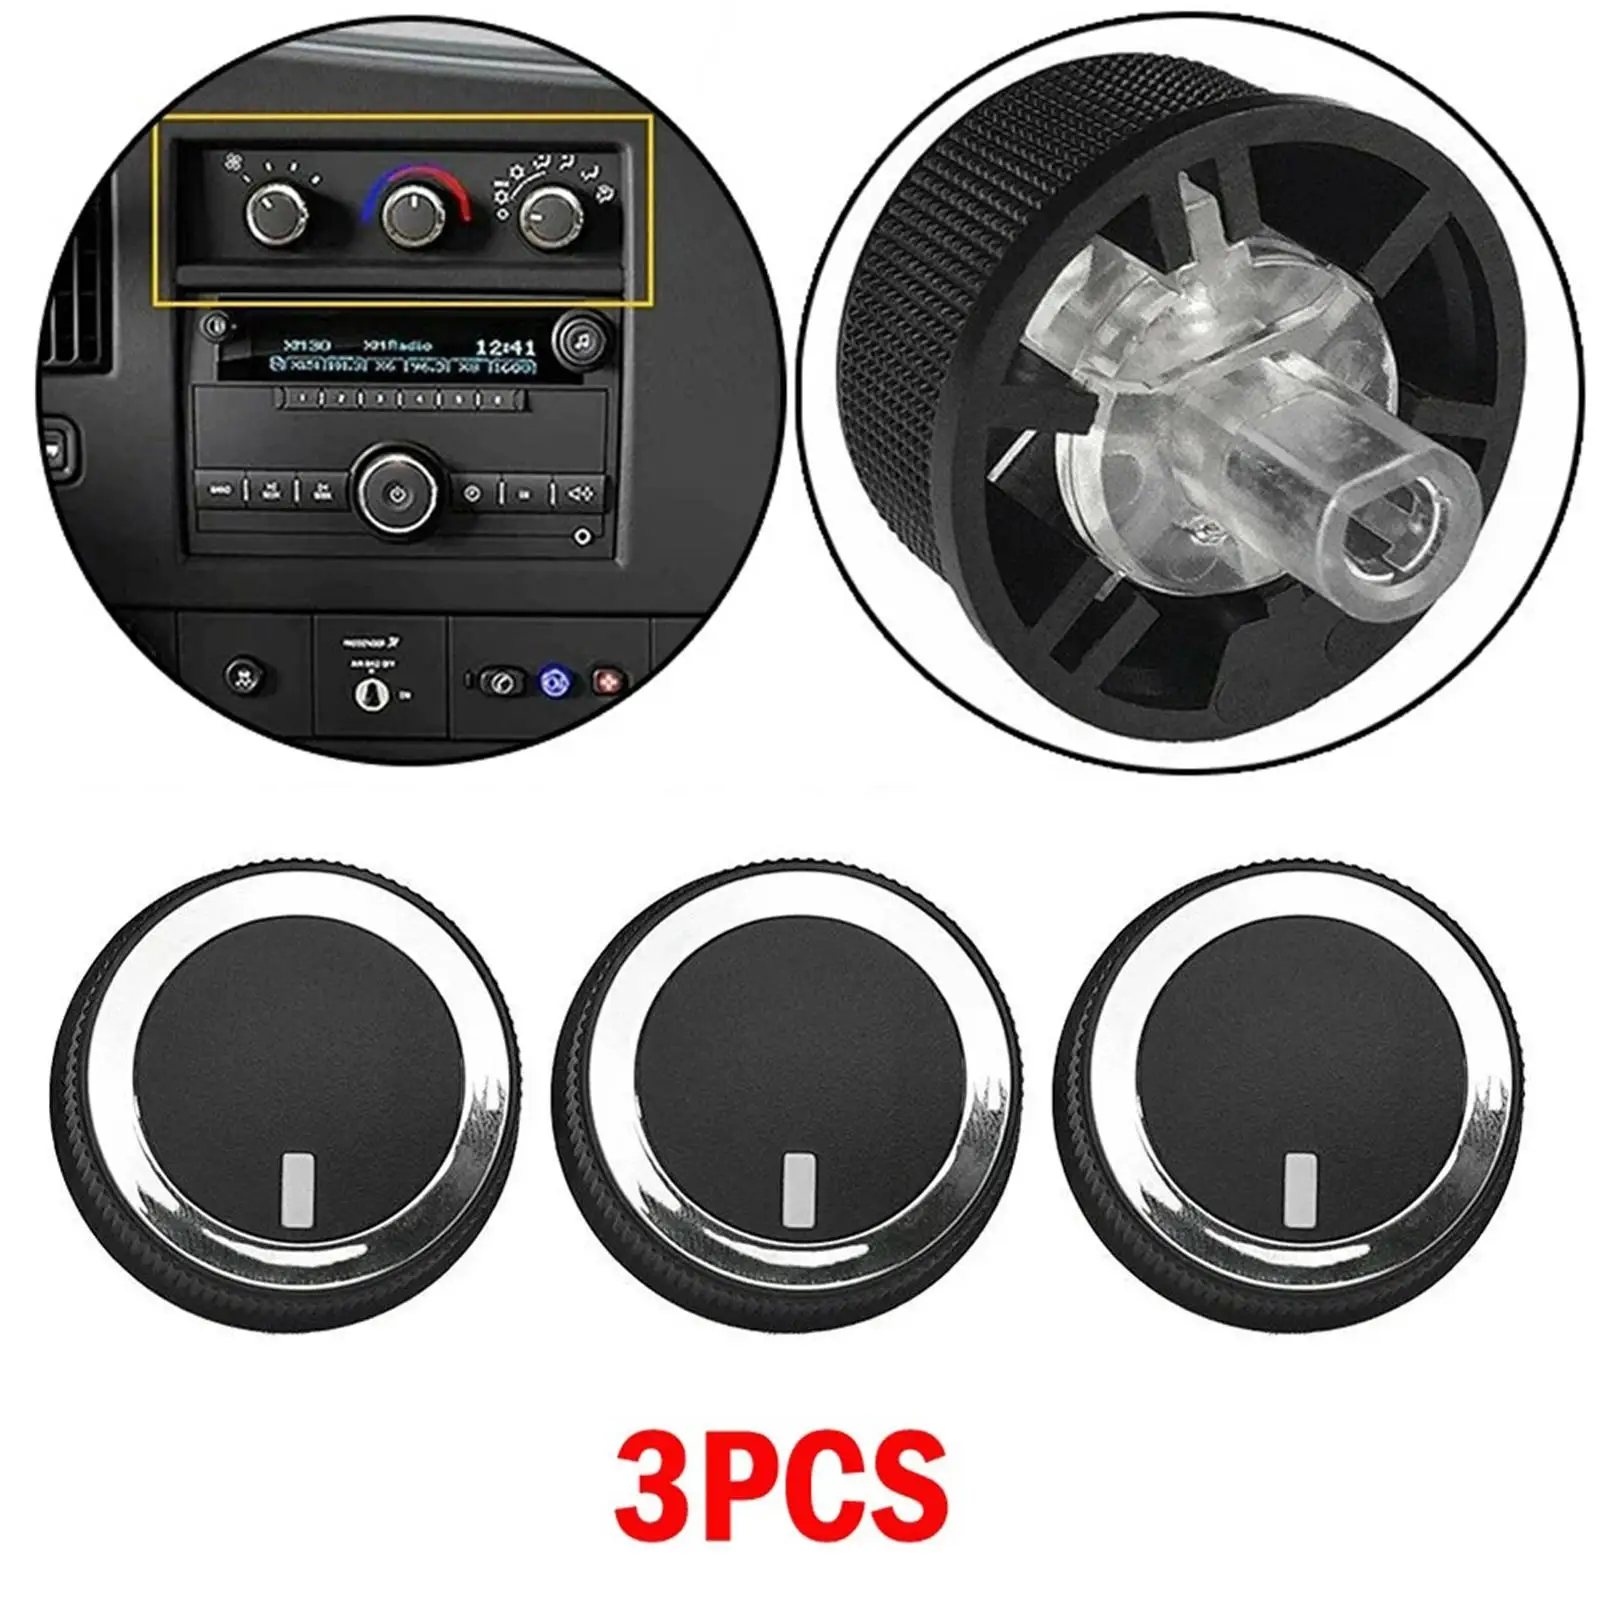 3Pcs   Temperature Switch Knob 84793085 for 2500 3500 Easily Install ,Bl k Durable Direct Repl es